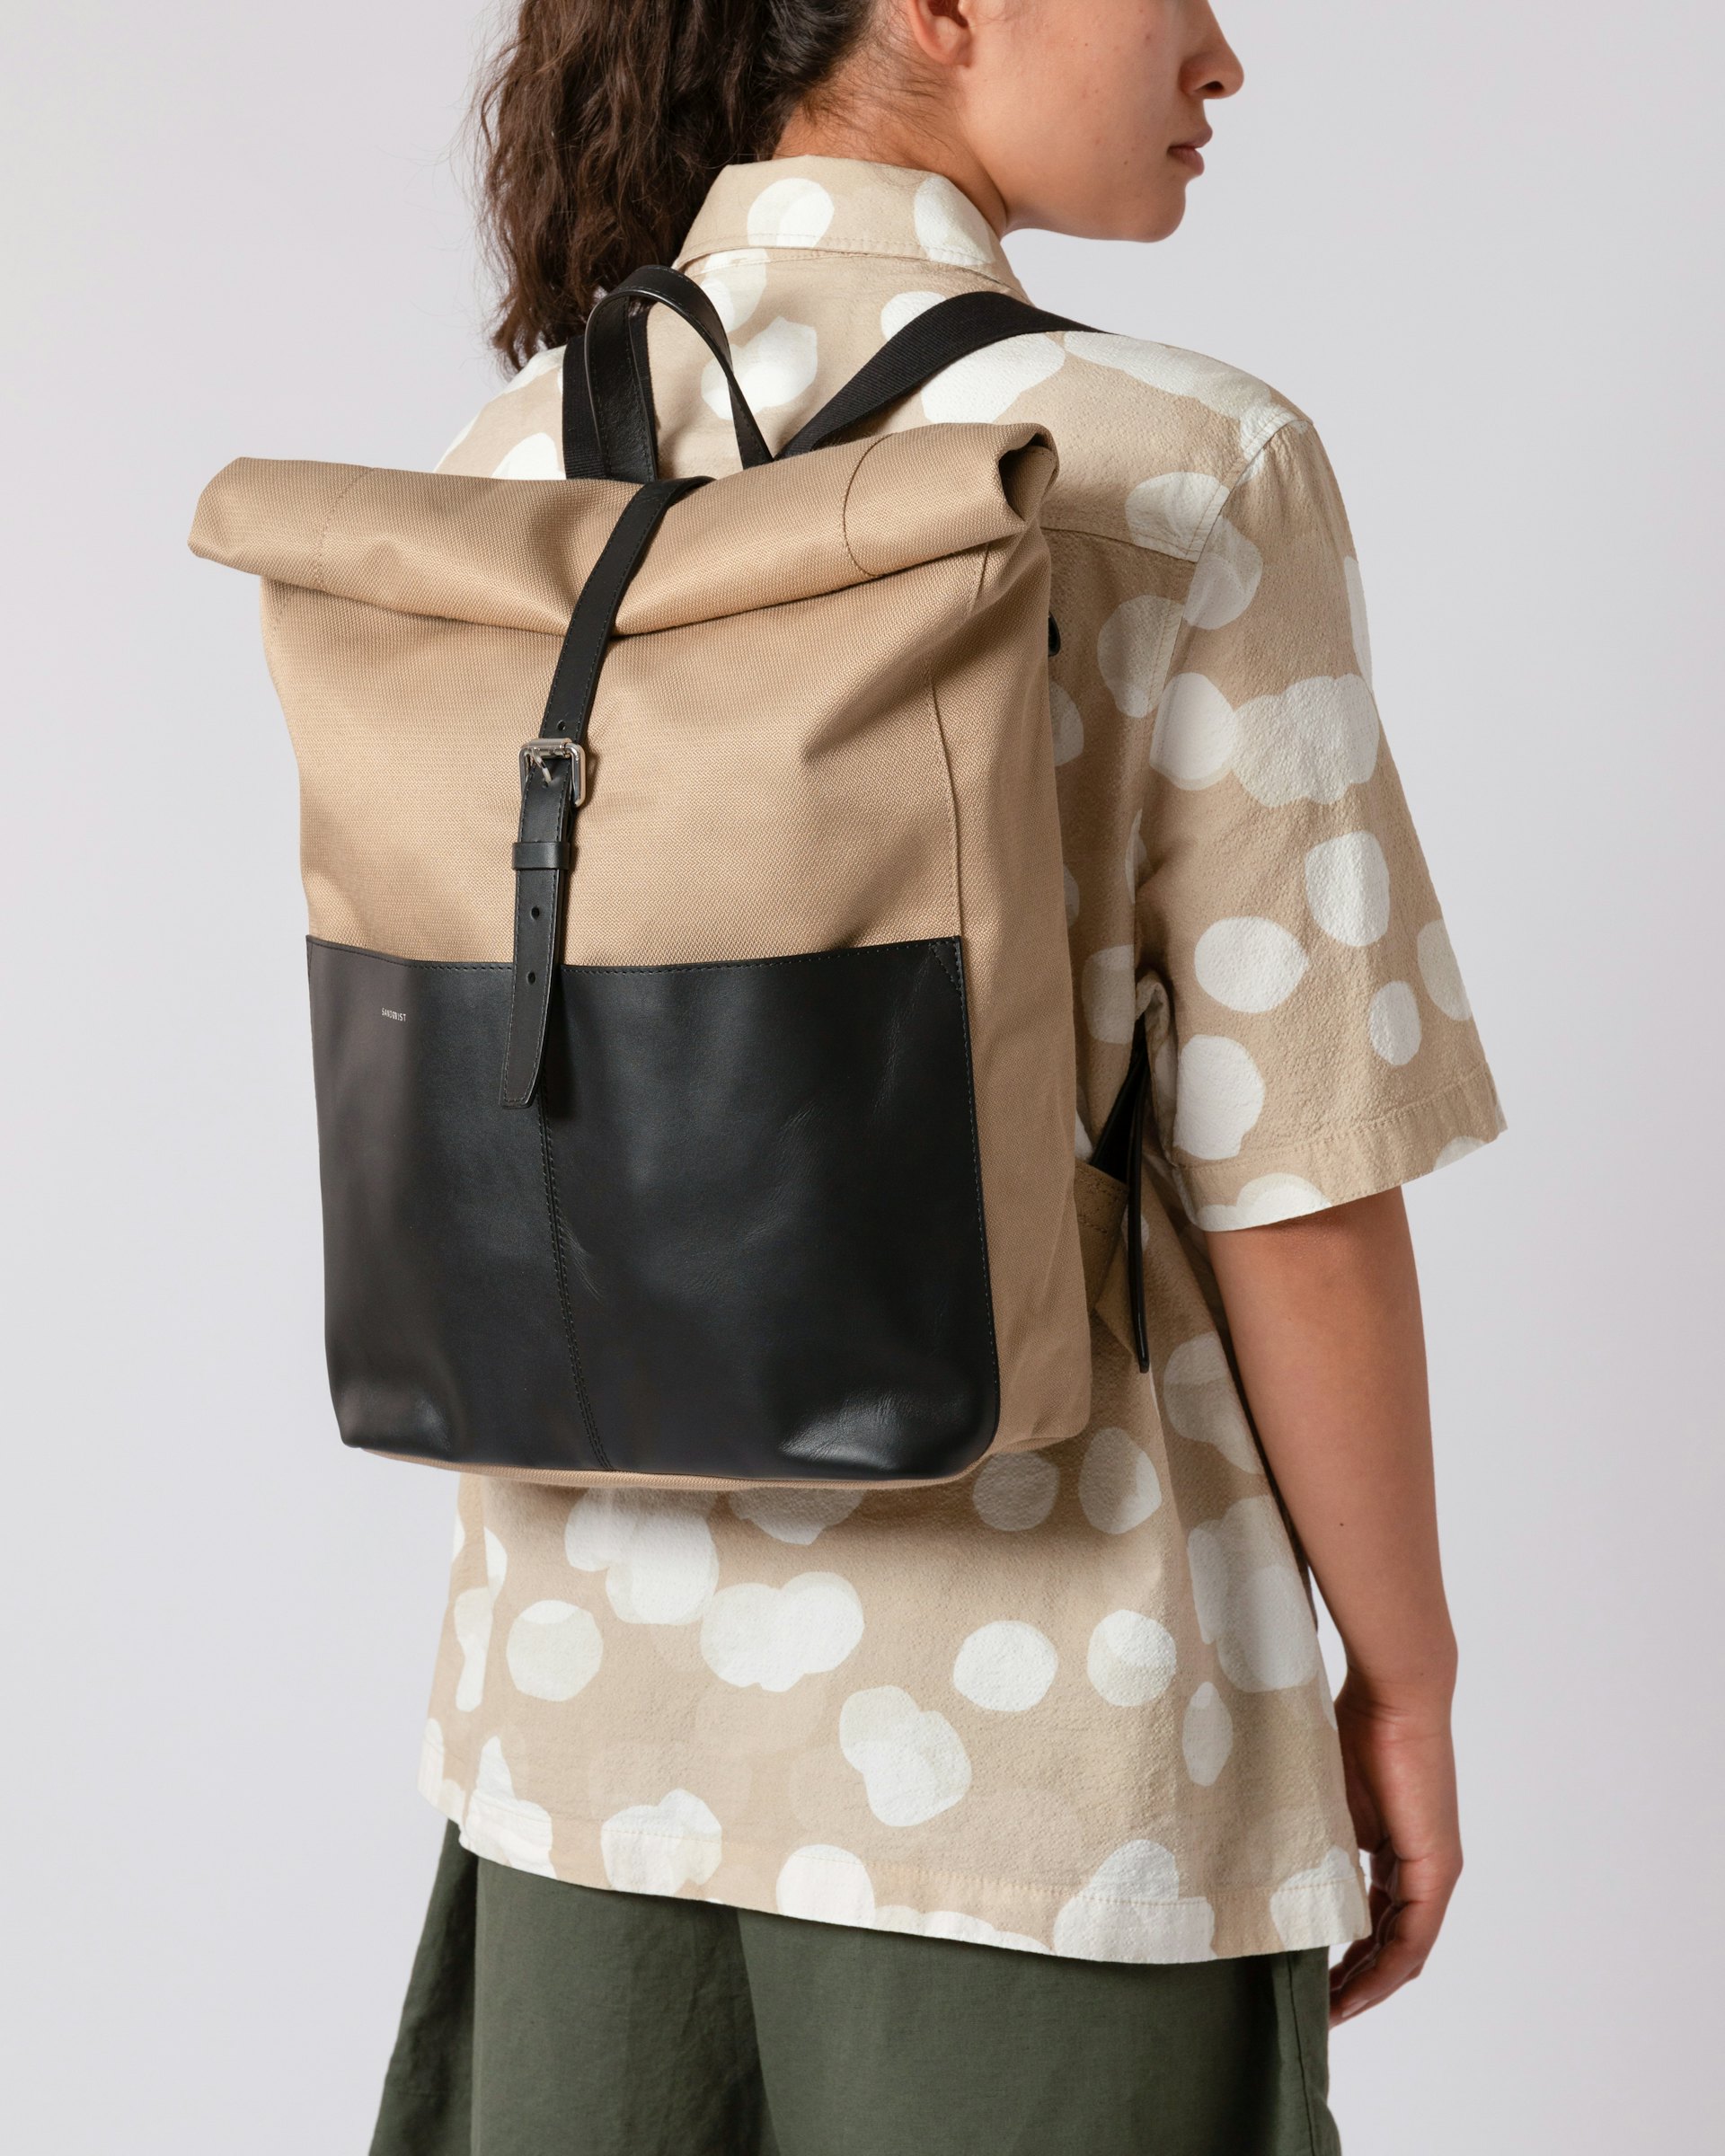 Antonia twill belongs to the category Backpacks and is in color black & beige (7 of 7)